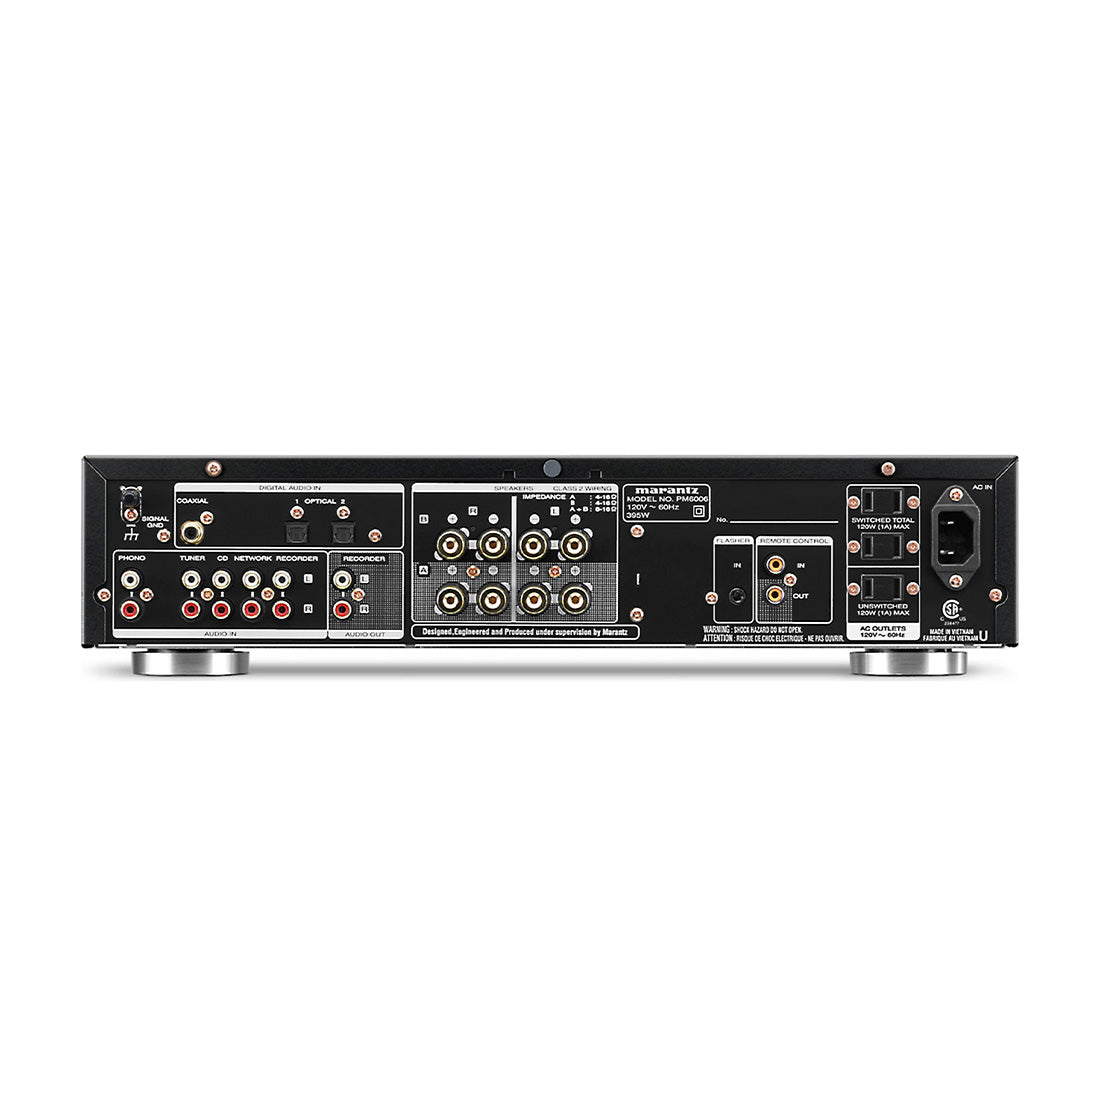 Marantz PM6006 Stereo integrated amplifier with built-in DAC - B-Stock